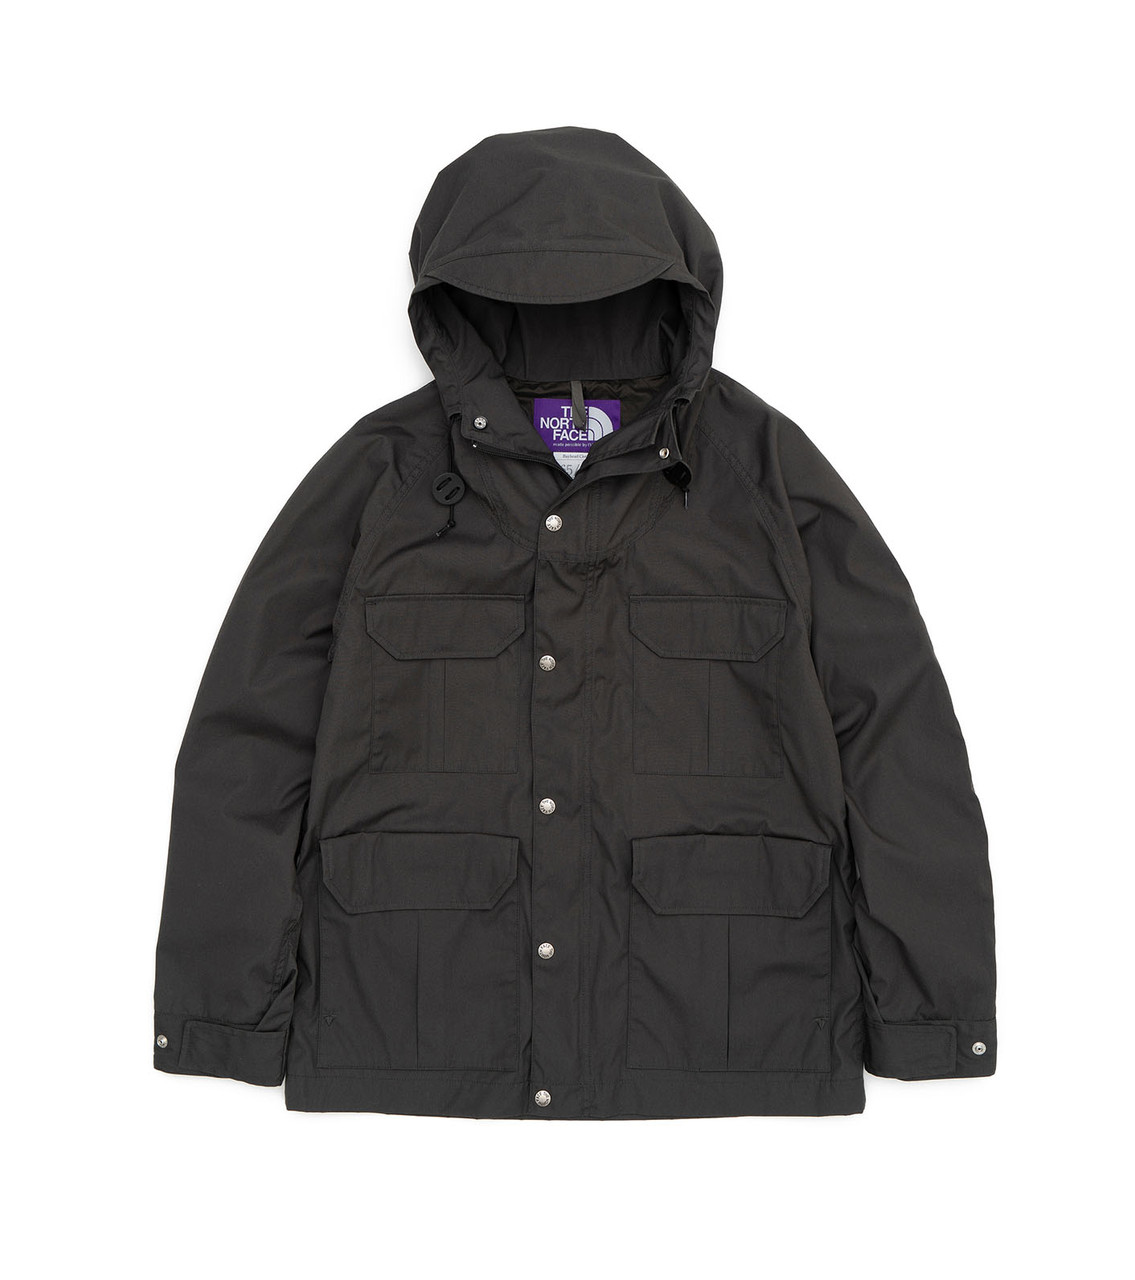 THE NORTH FACE PURPLE LABEL 65/35 Mountain Parka NP2051N 6298